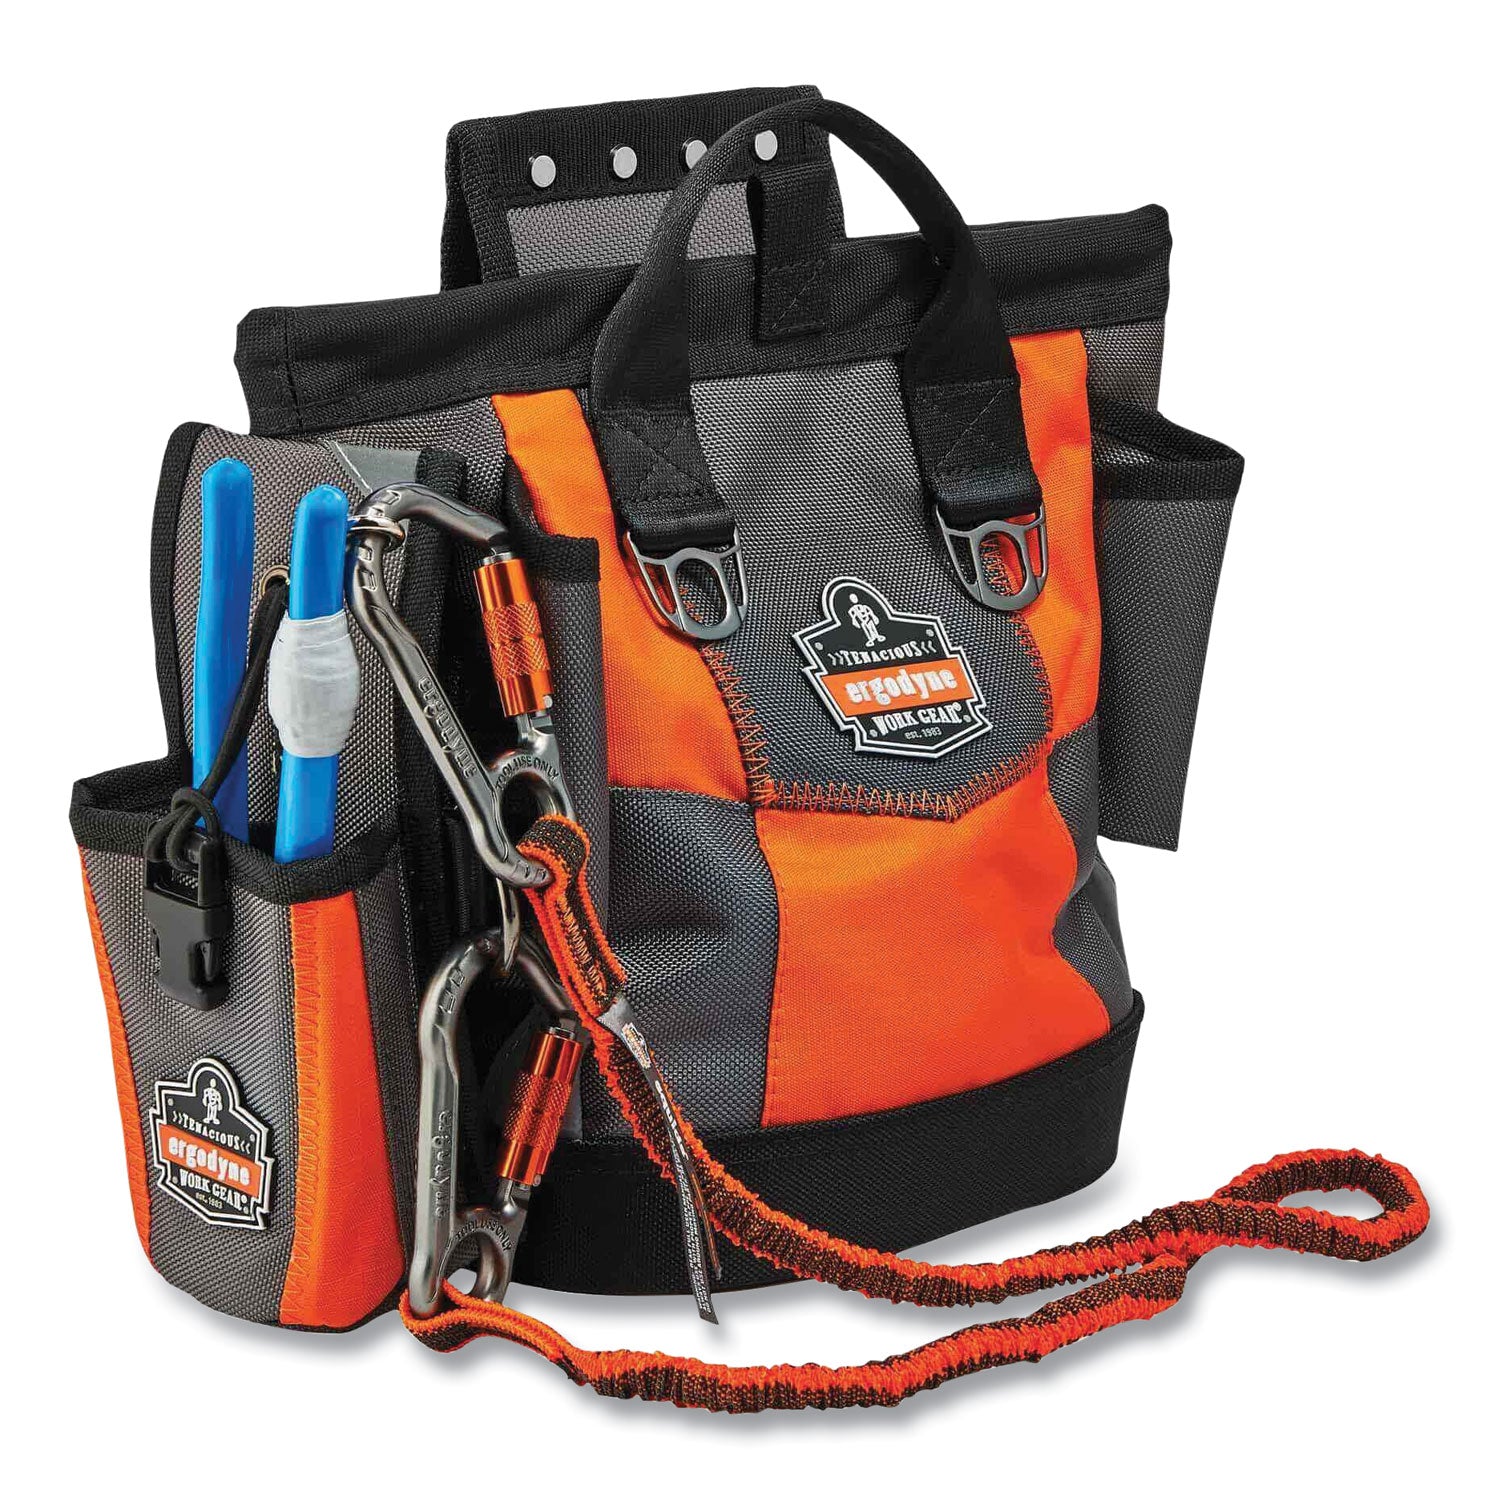 arsenal-5527-premium-topped-tool-pouch-with-hinged-closure-6-x-10-x-115-polyester-orange-ships-in-1-3-business-days_ego13627 - 7